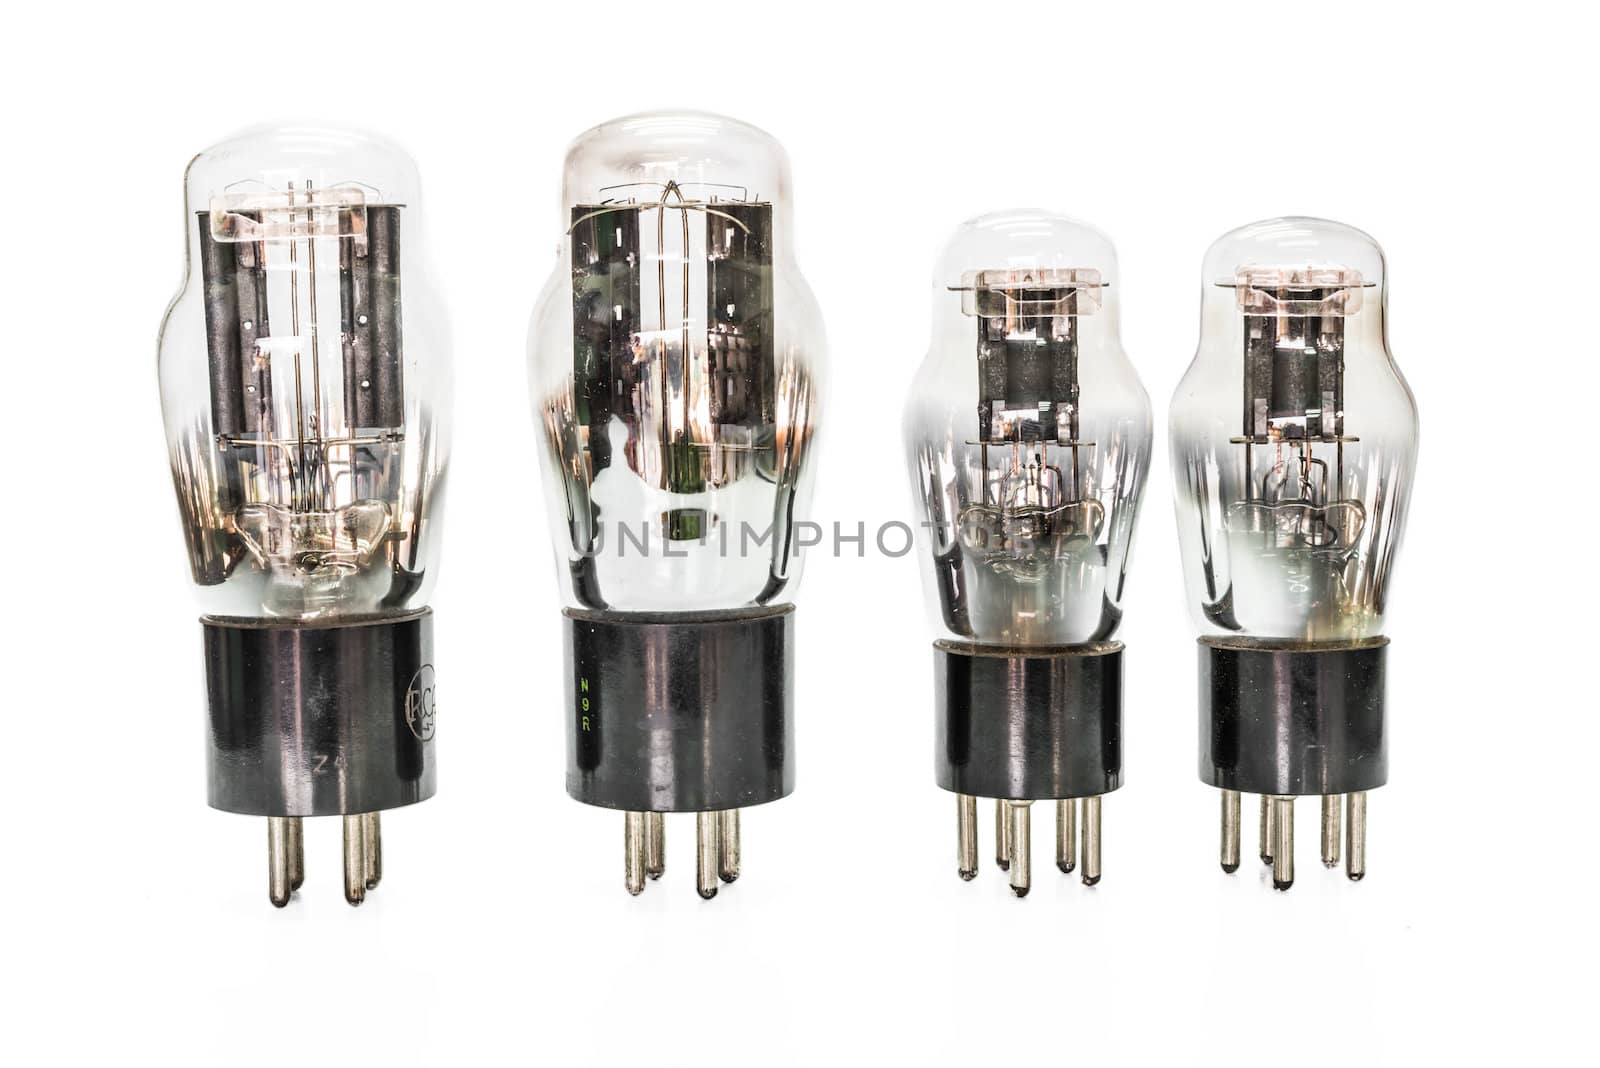 Vacuum electronic preamplifier tubes by wmitrmatr